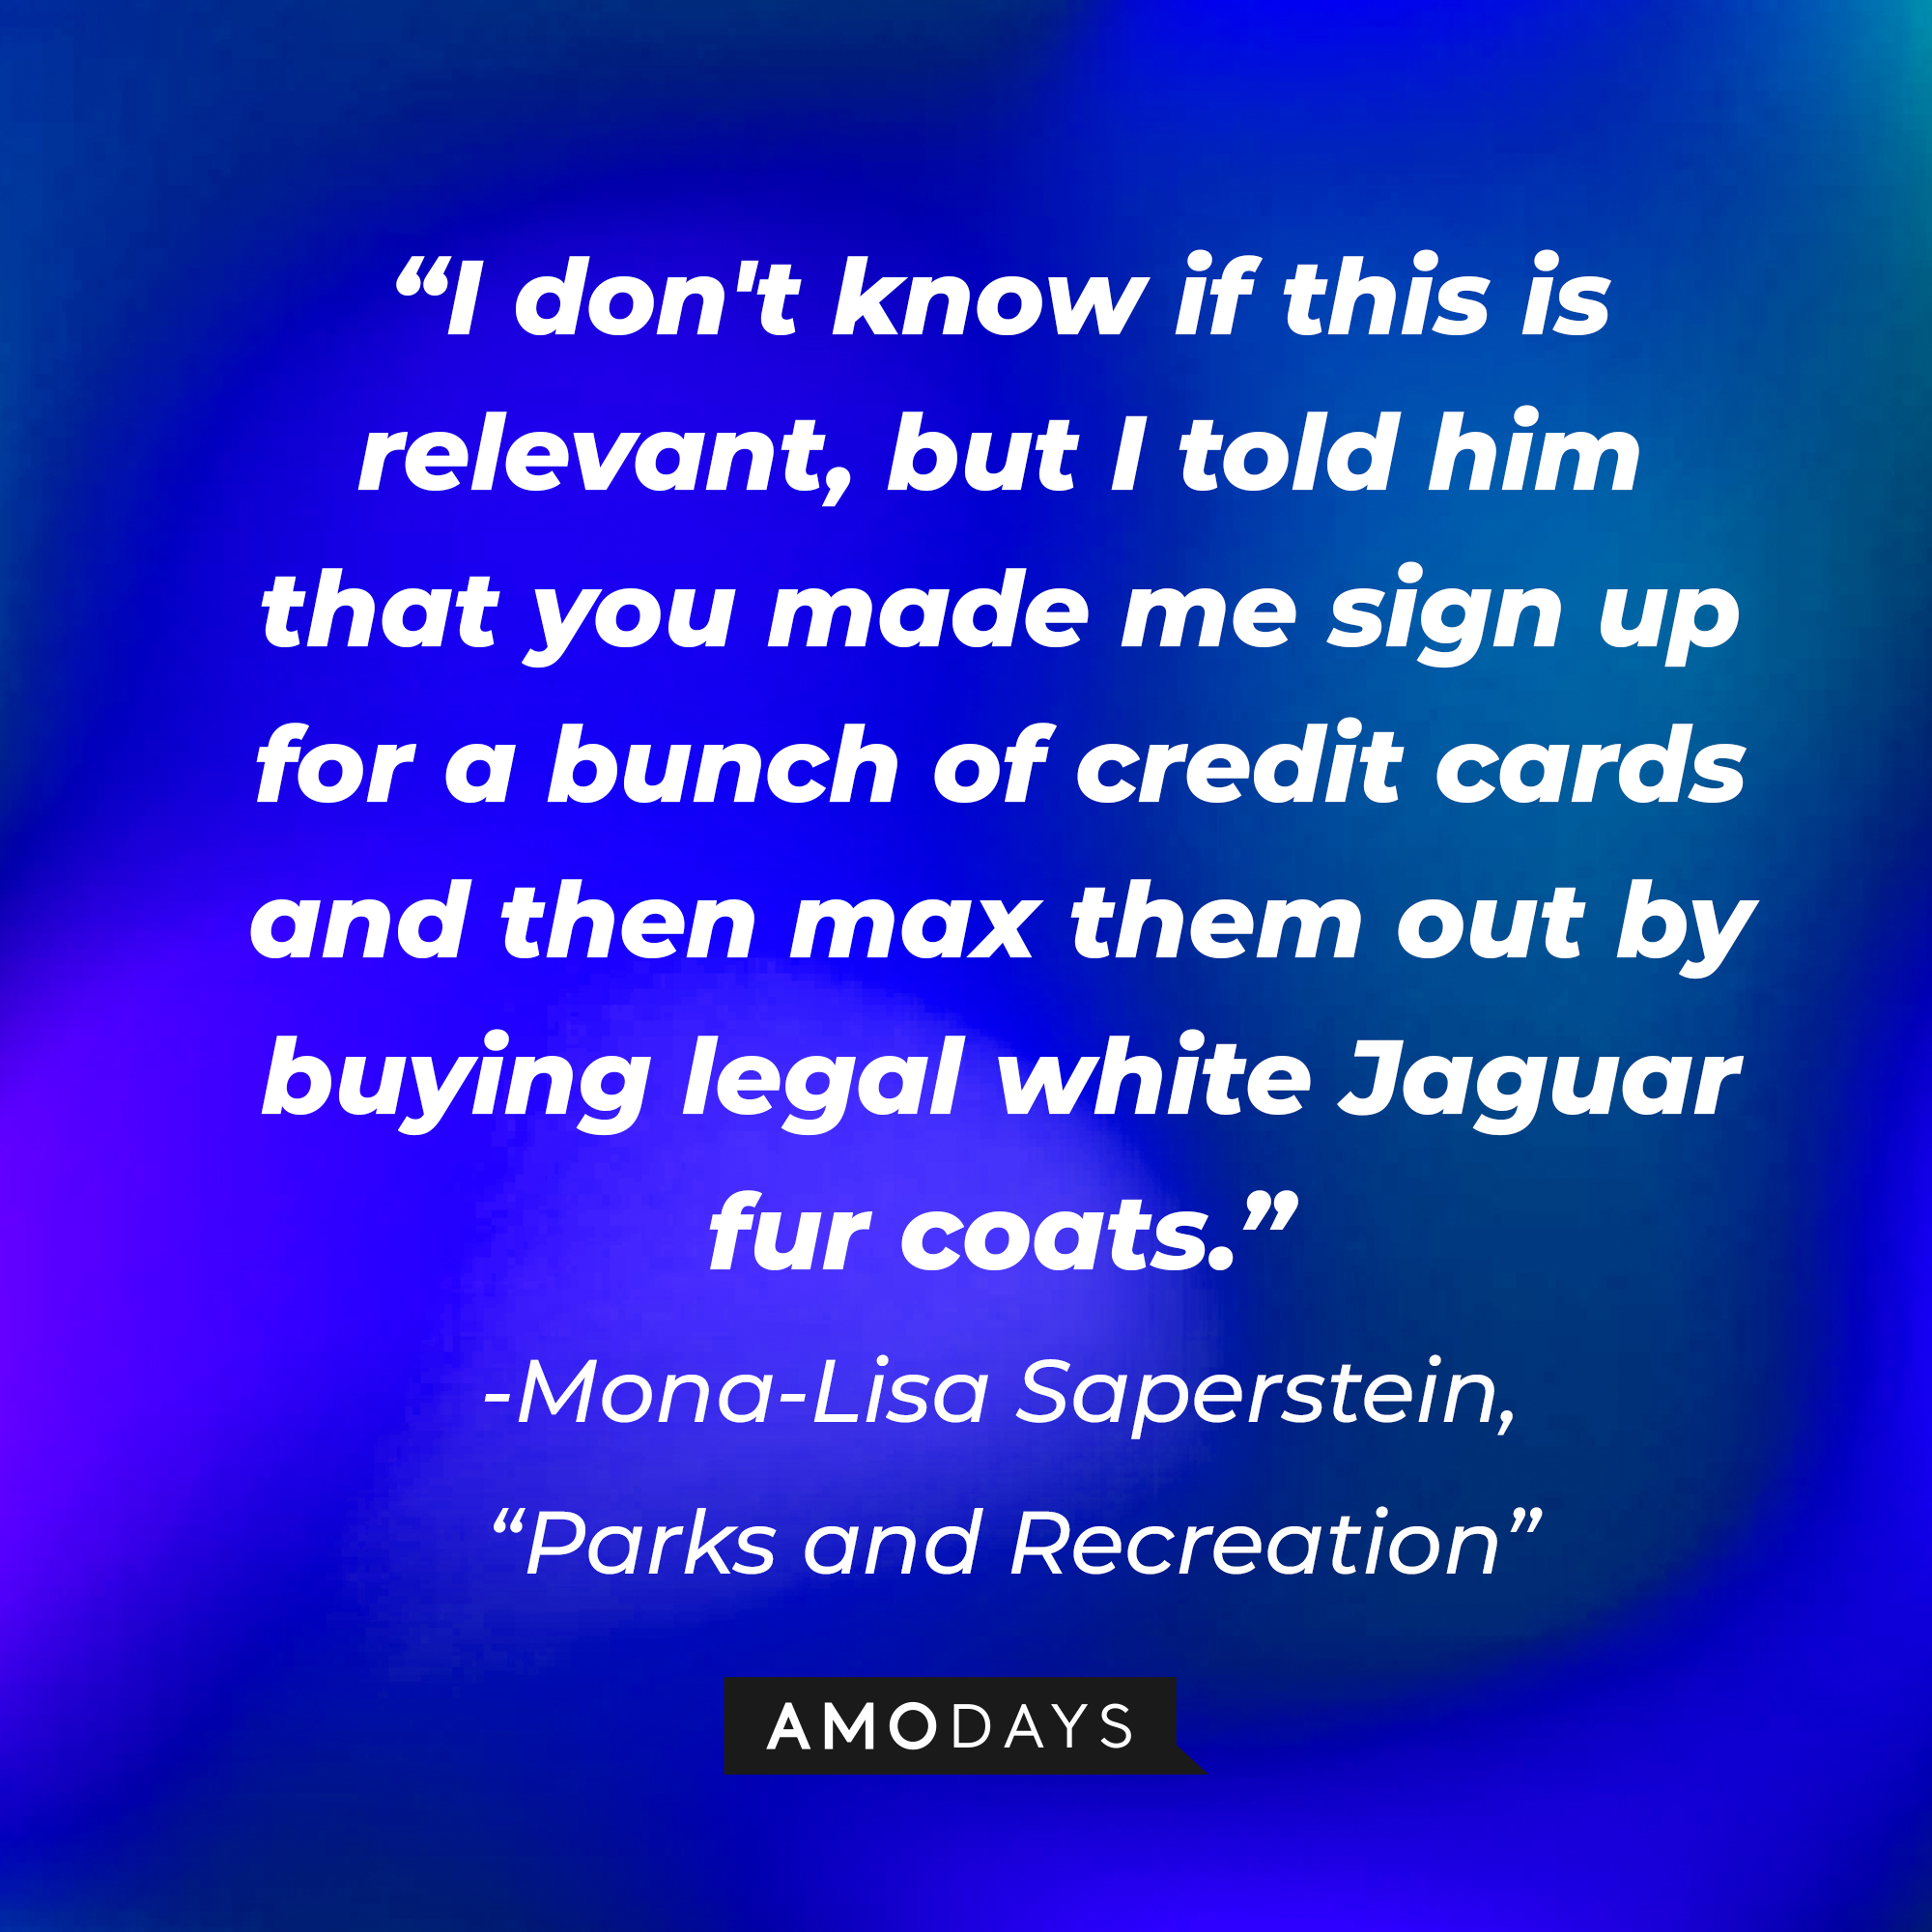 Mona-Lisa Saperstein's quote on "Parks and Recreation:" “I don't know if this is relevant, but I told him that you made me sign up for a bunch of credit cards and then max them out by buying legal white Jaguar fur coats." | Source: AmoDays